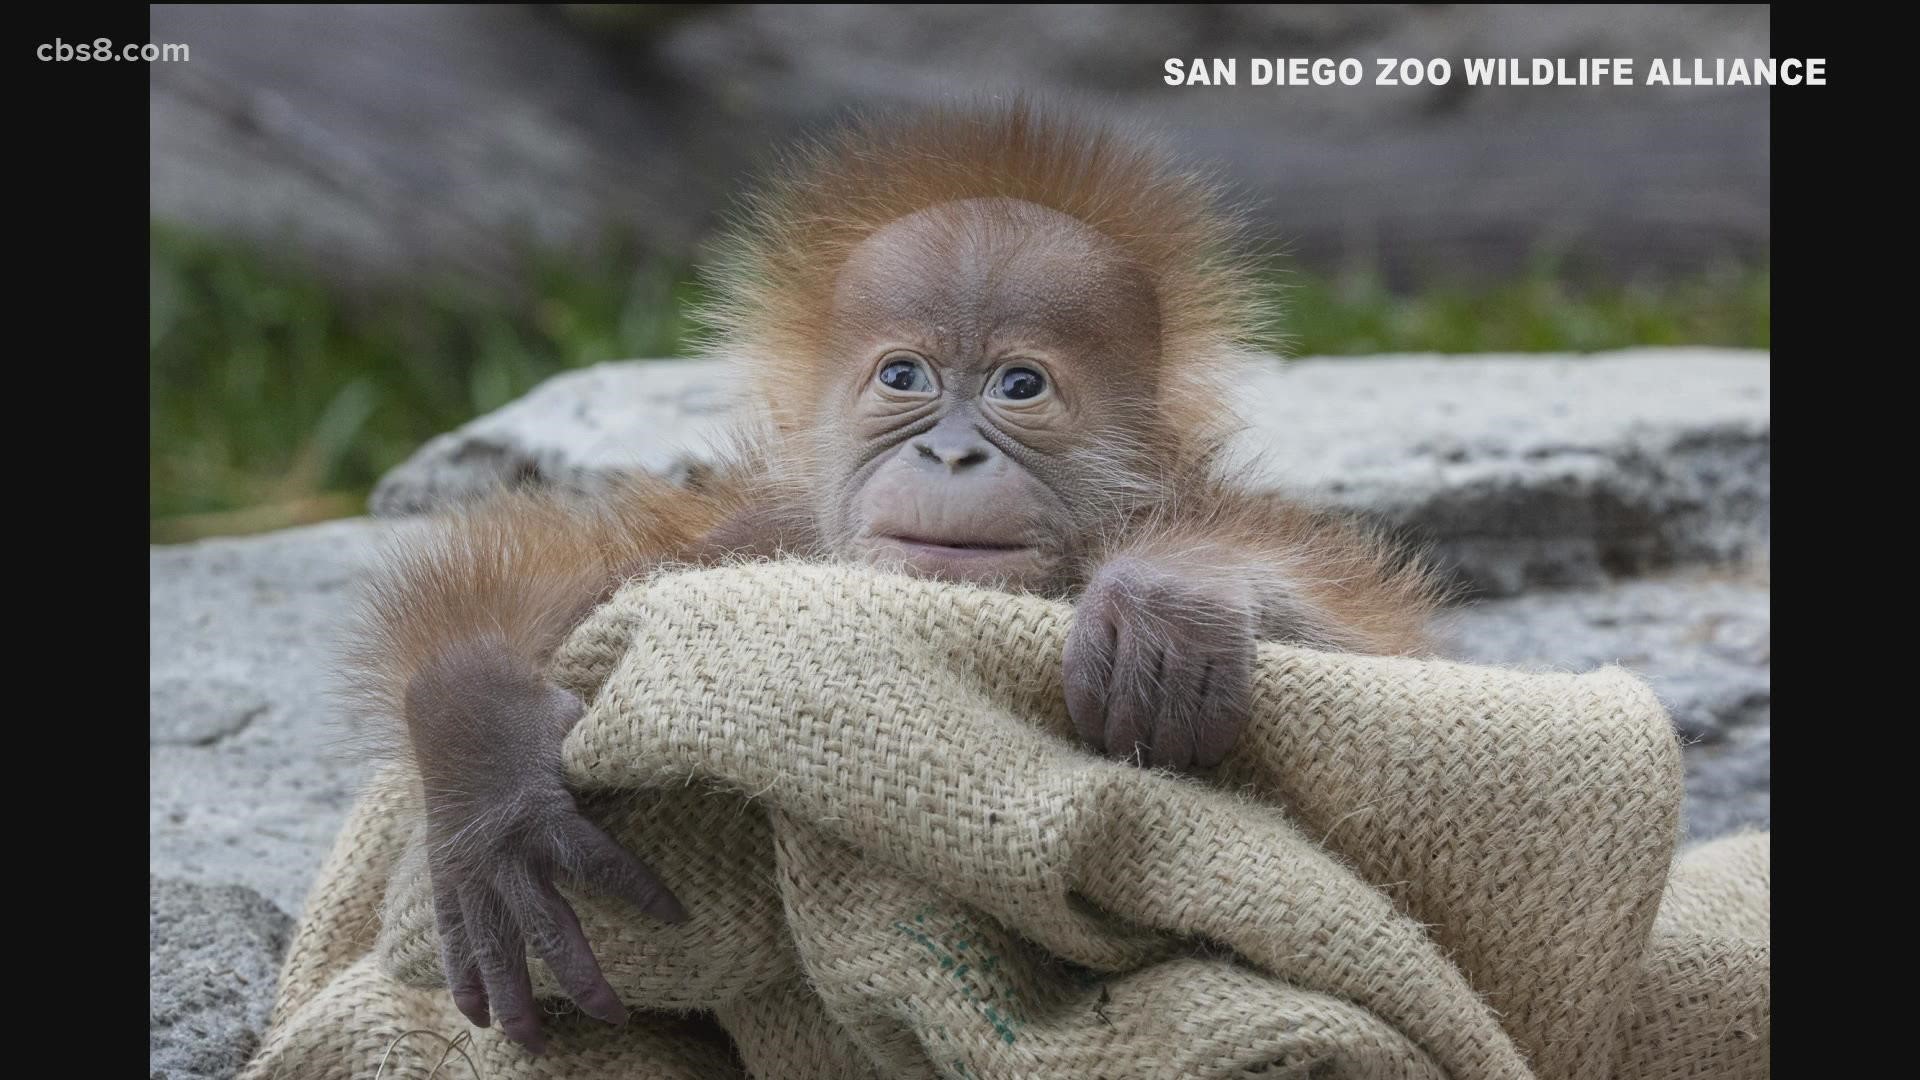 Indah, a 35-year-old Sumatran orangutan, gave birth to her third infant earlier this month, the San Diego Zoo announced Tuesday.